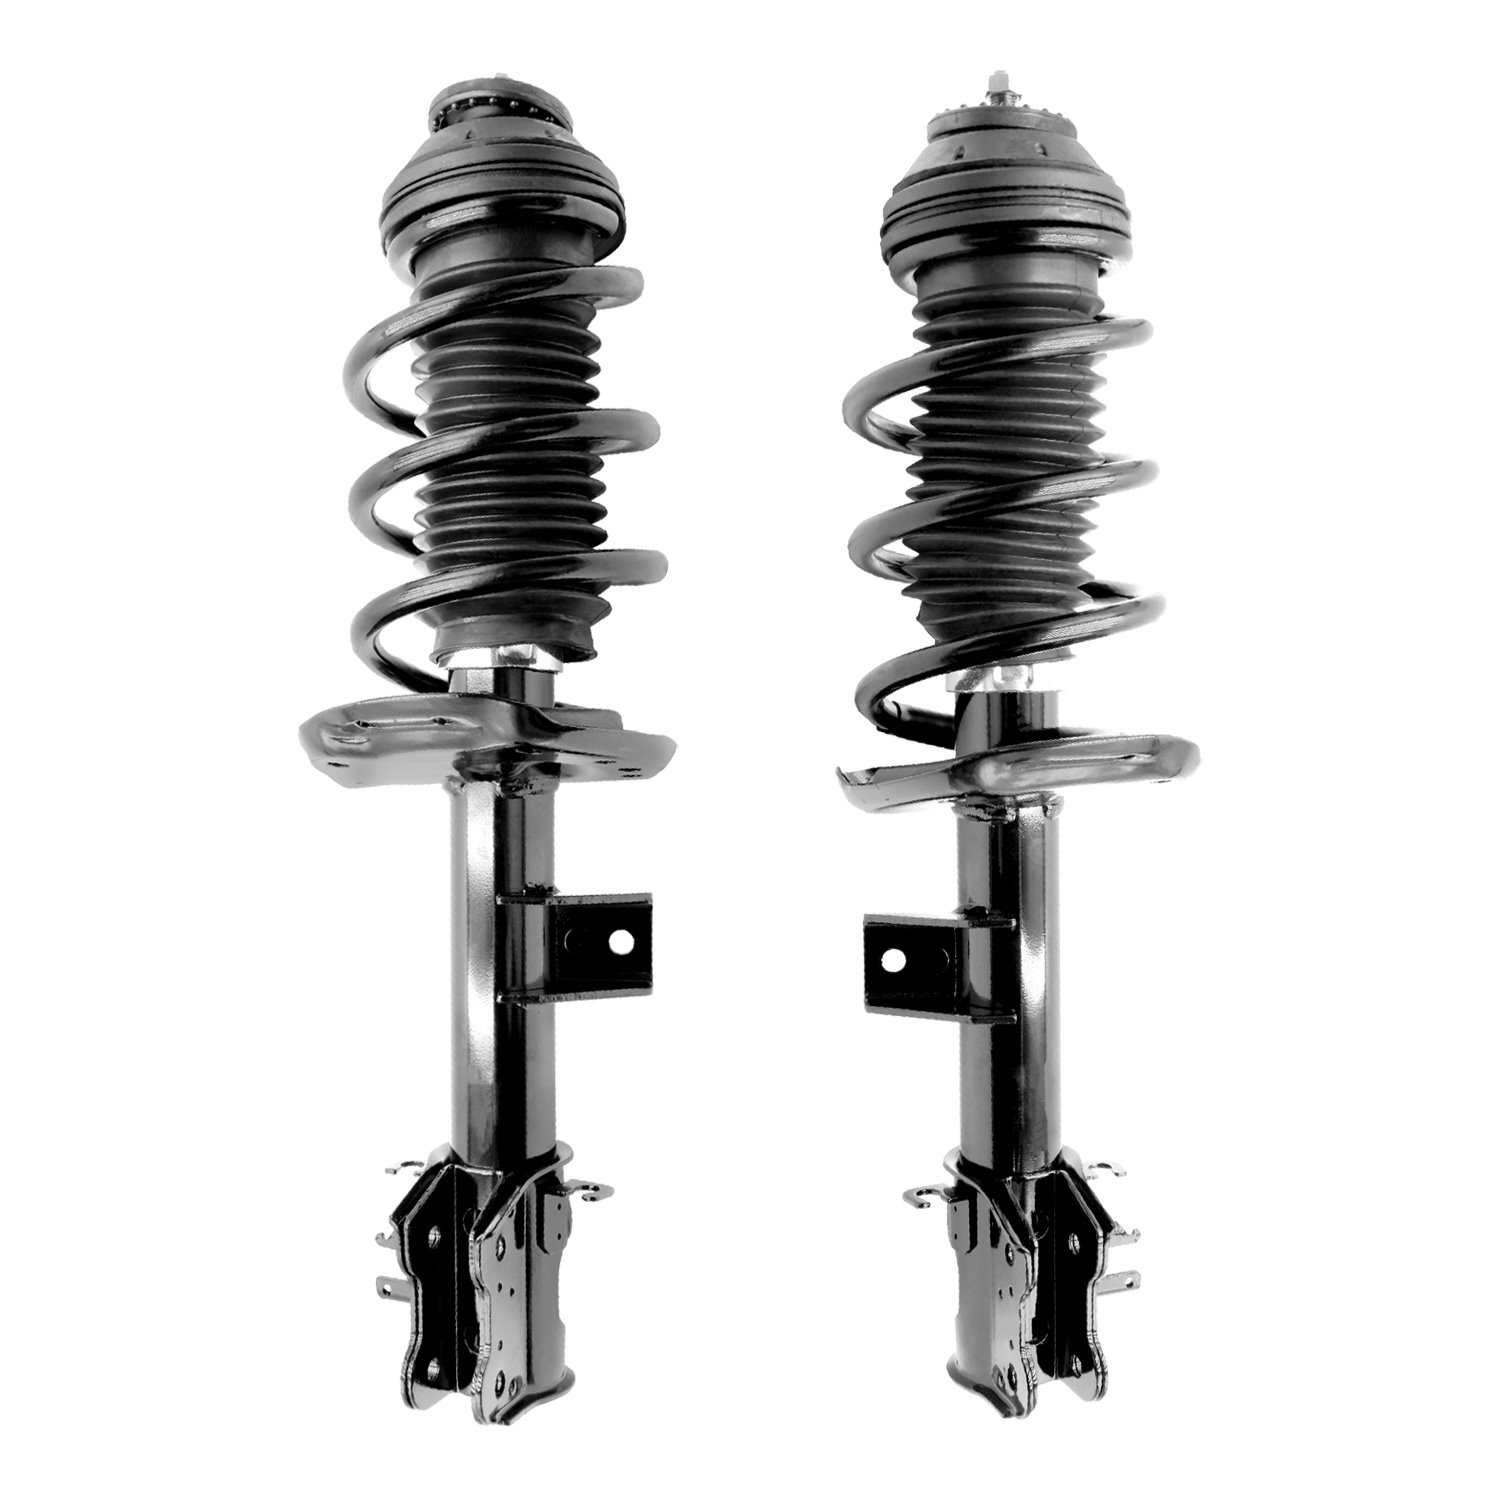 2-13551-13552-001 Front Suspension Strut & Coil Spring Assemby Set Fits Select Fiat 500